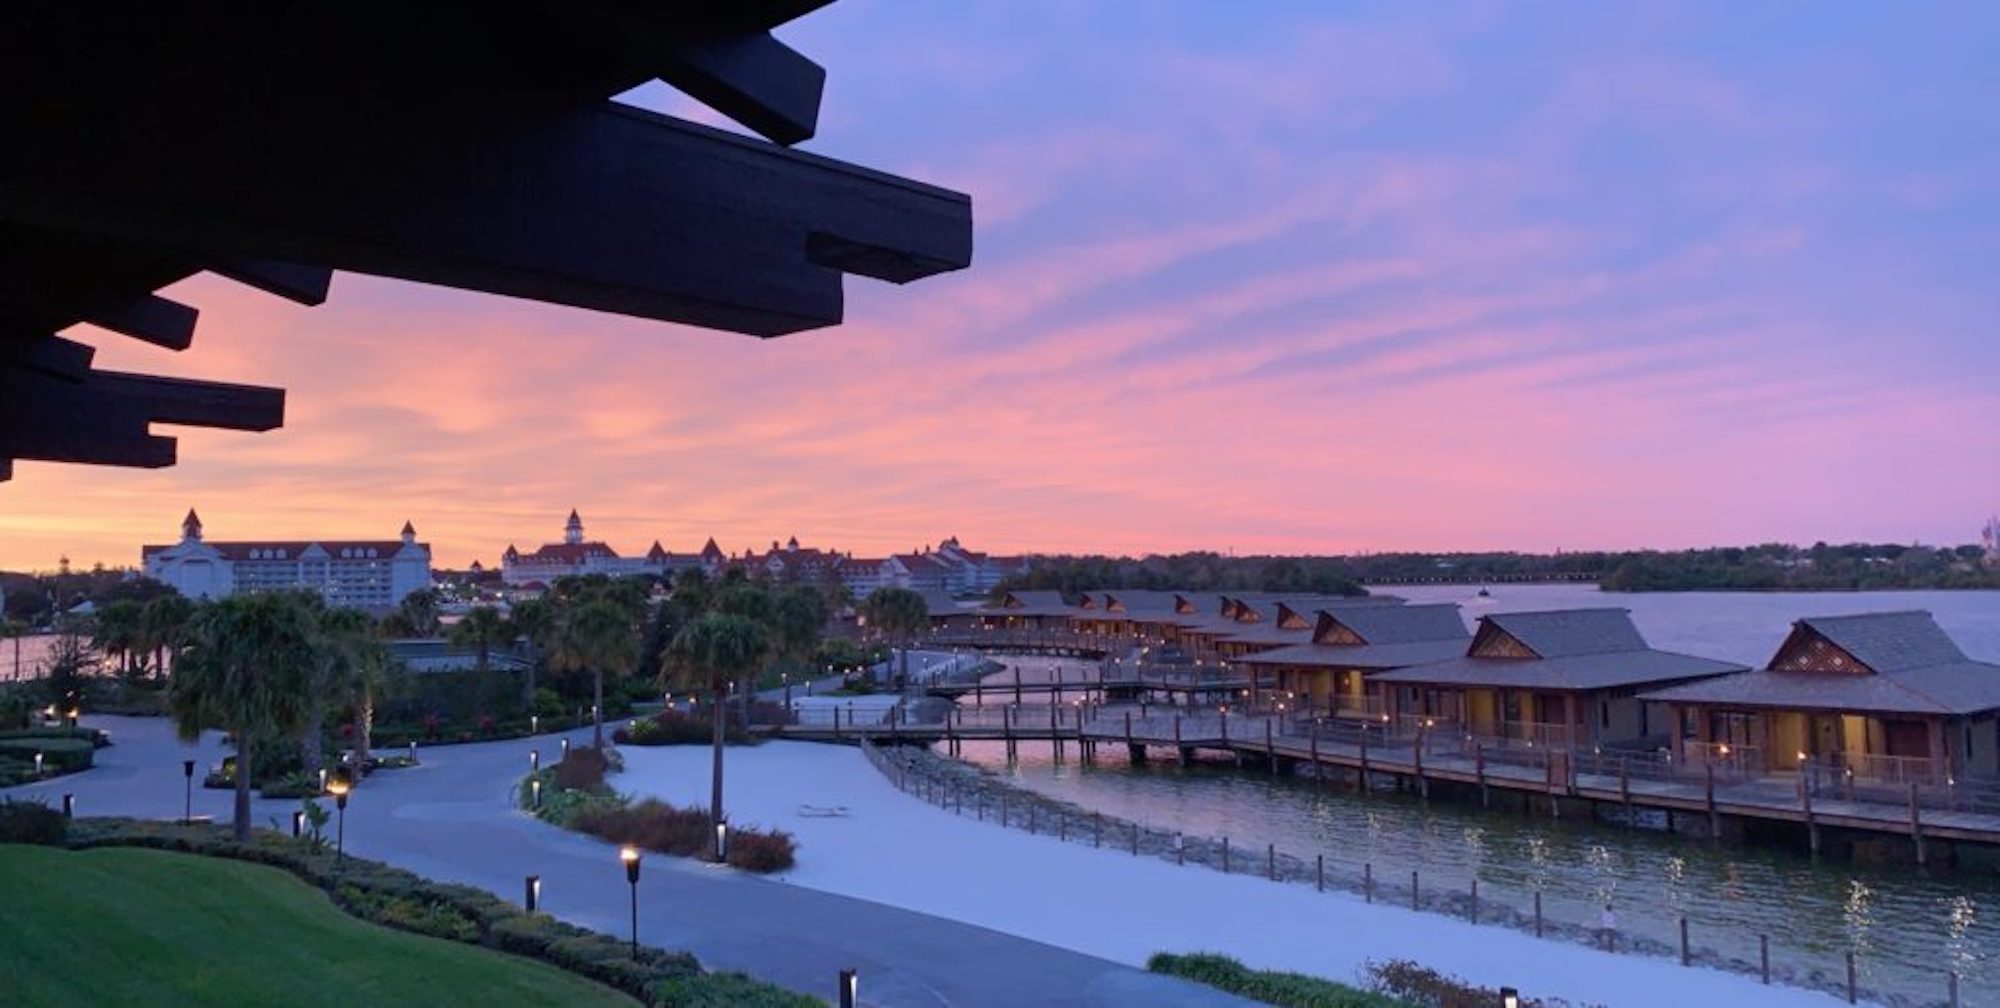 Disney DVC Polynesian view of water bungalows at sunset